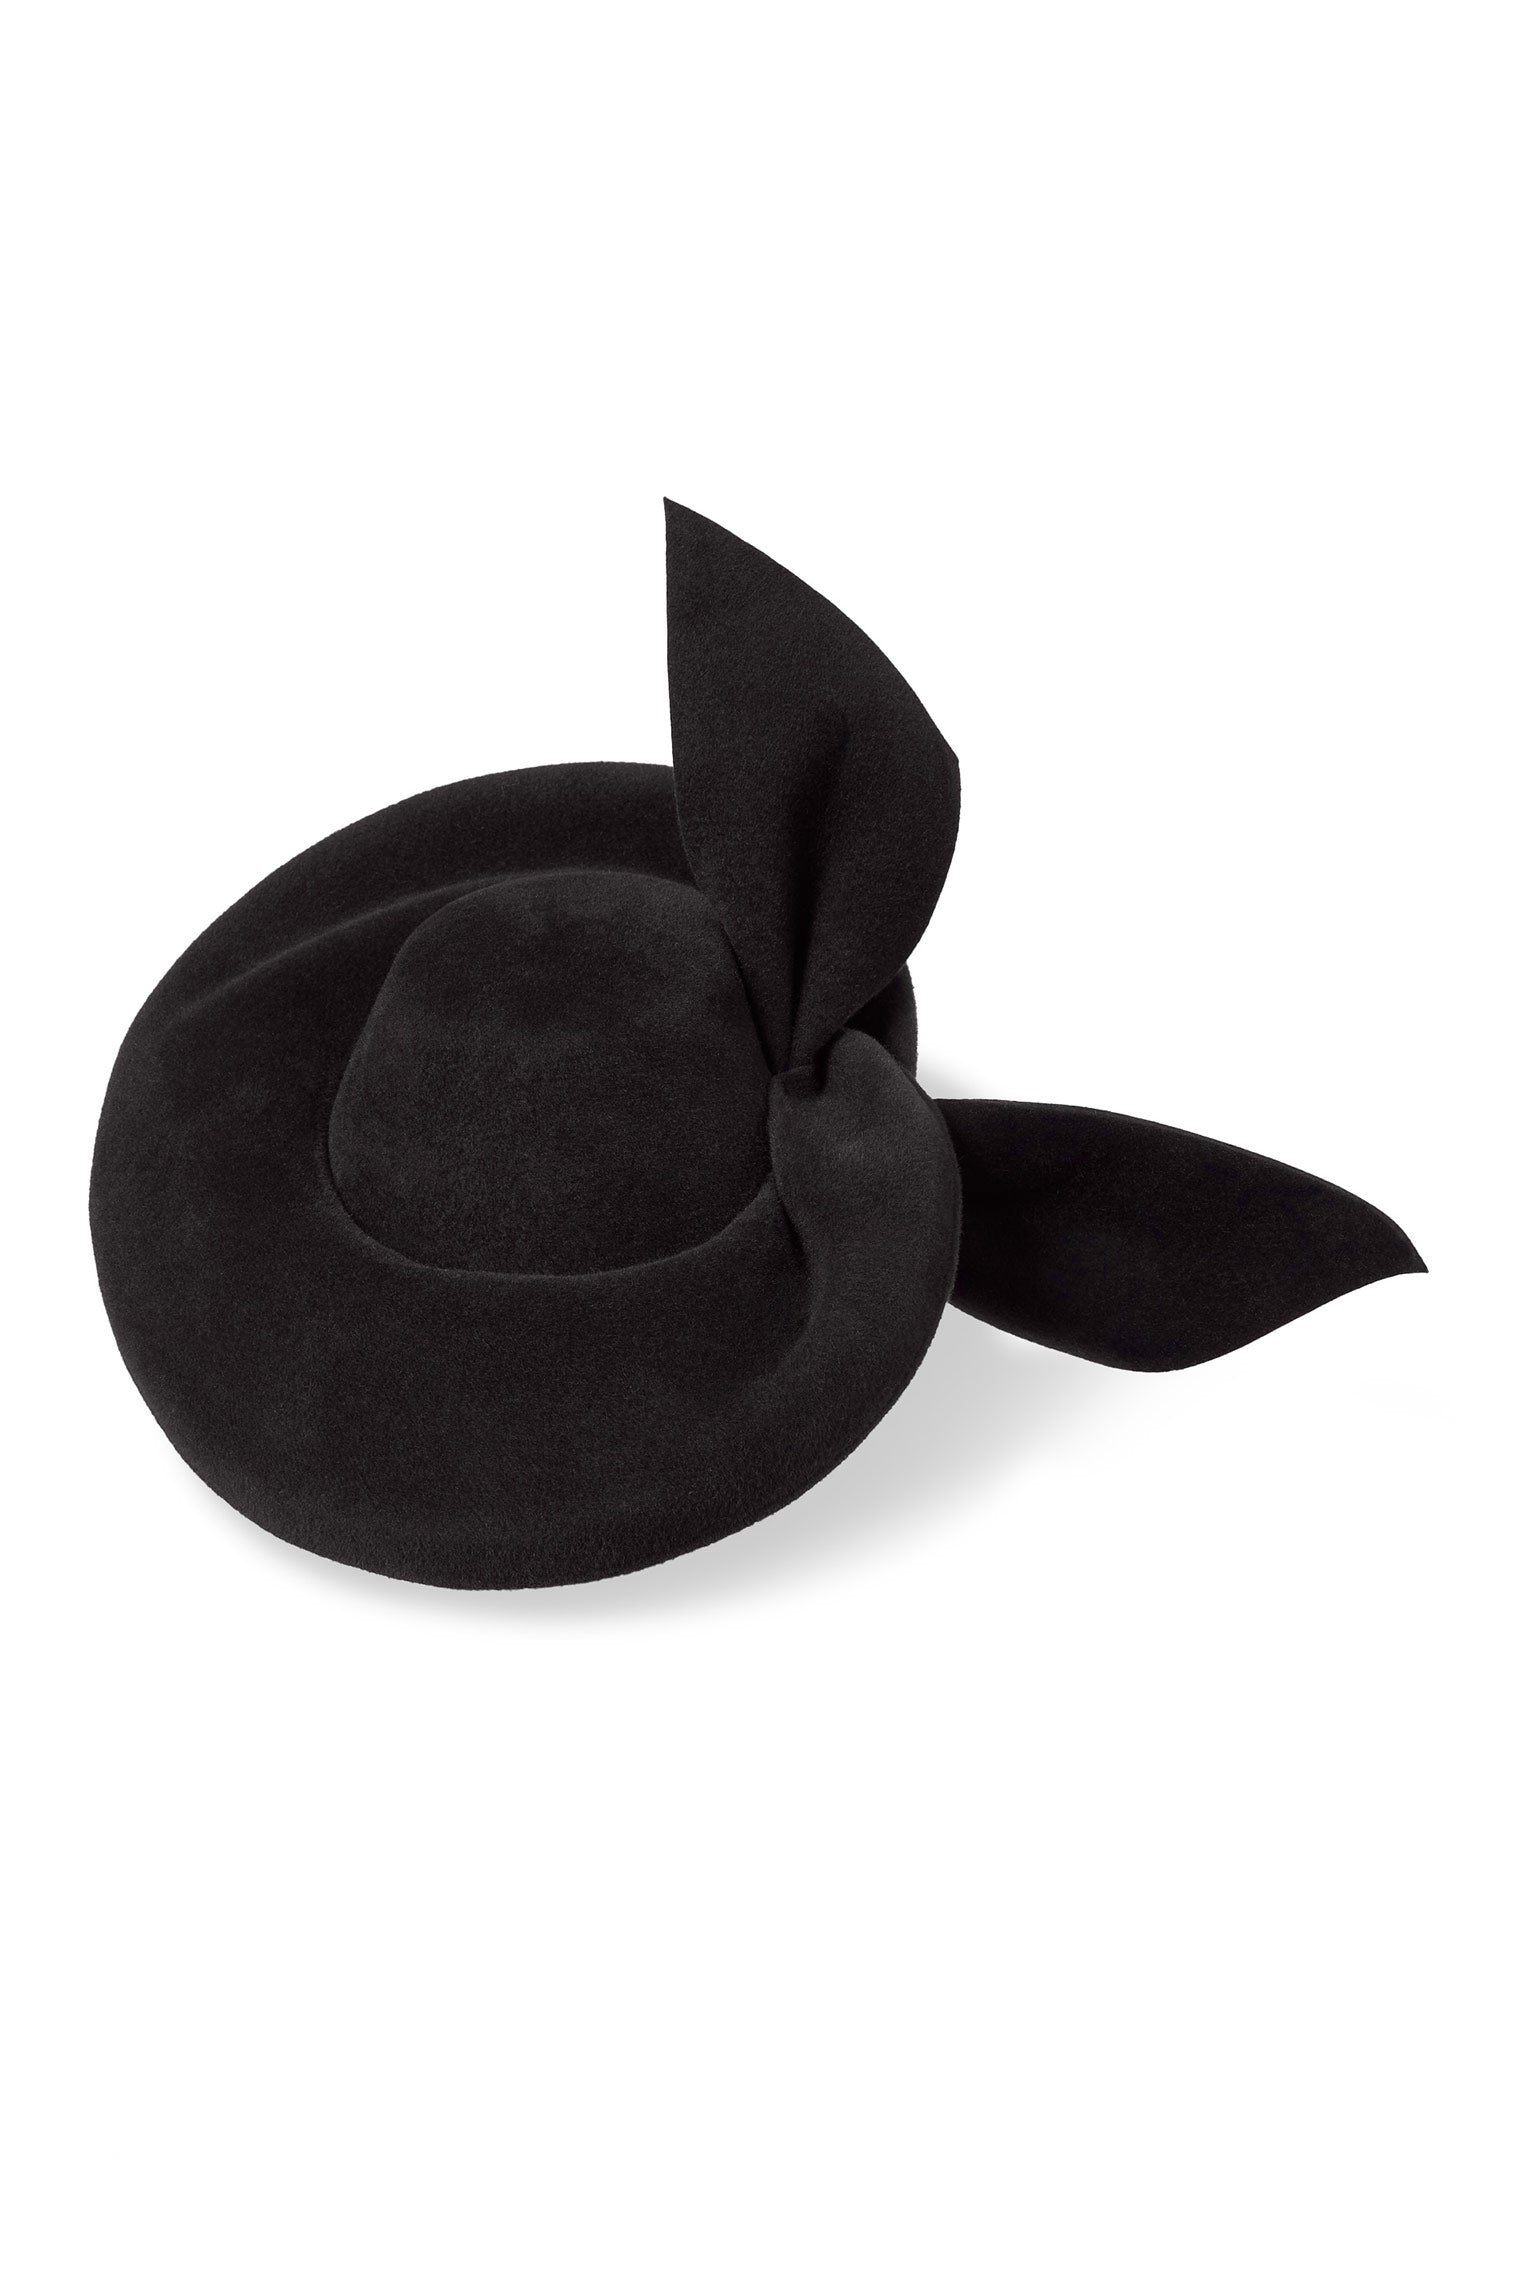 Hedy Black Percher Hat - Lock Couture by Awon Golding - Lock & Co. Hatters London UK